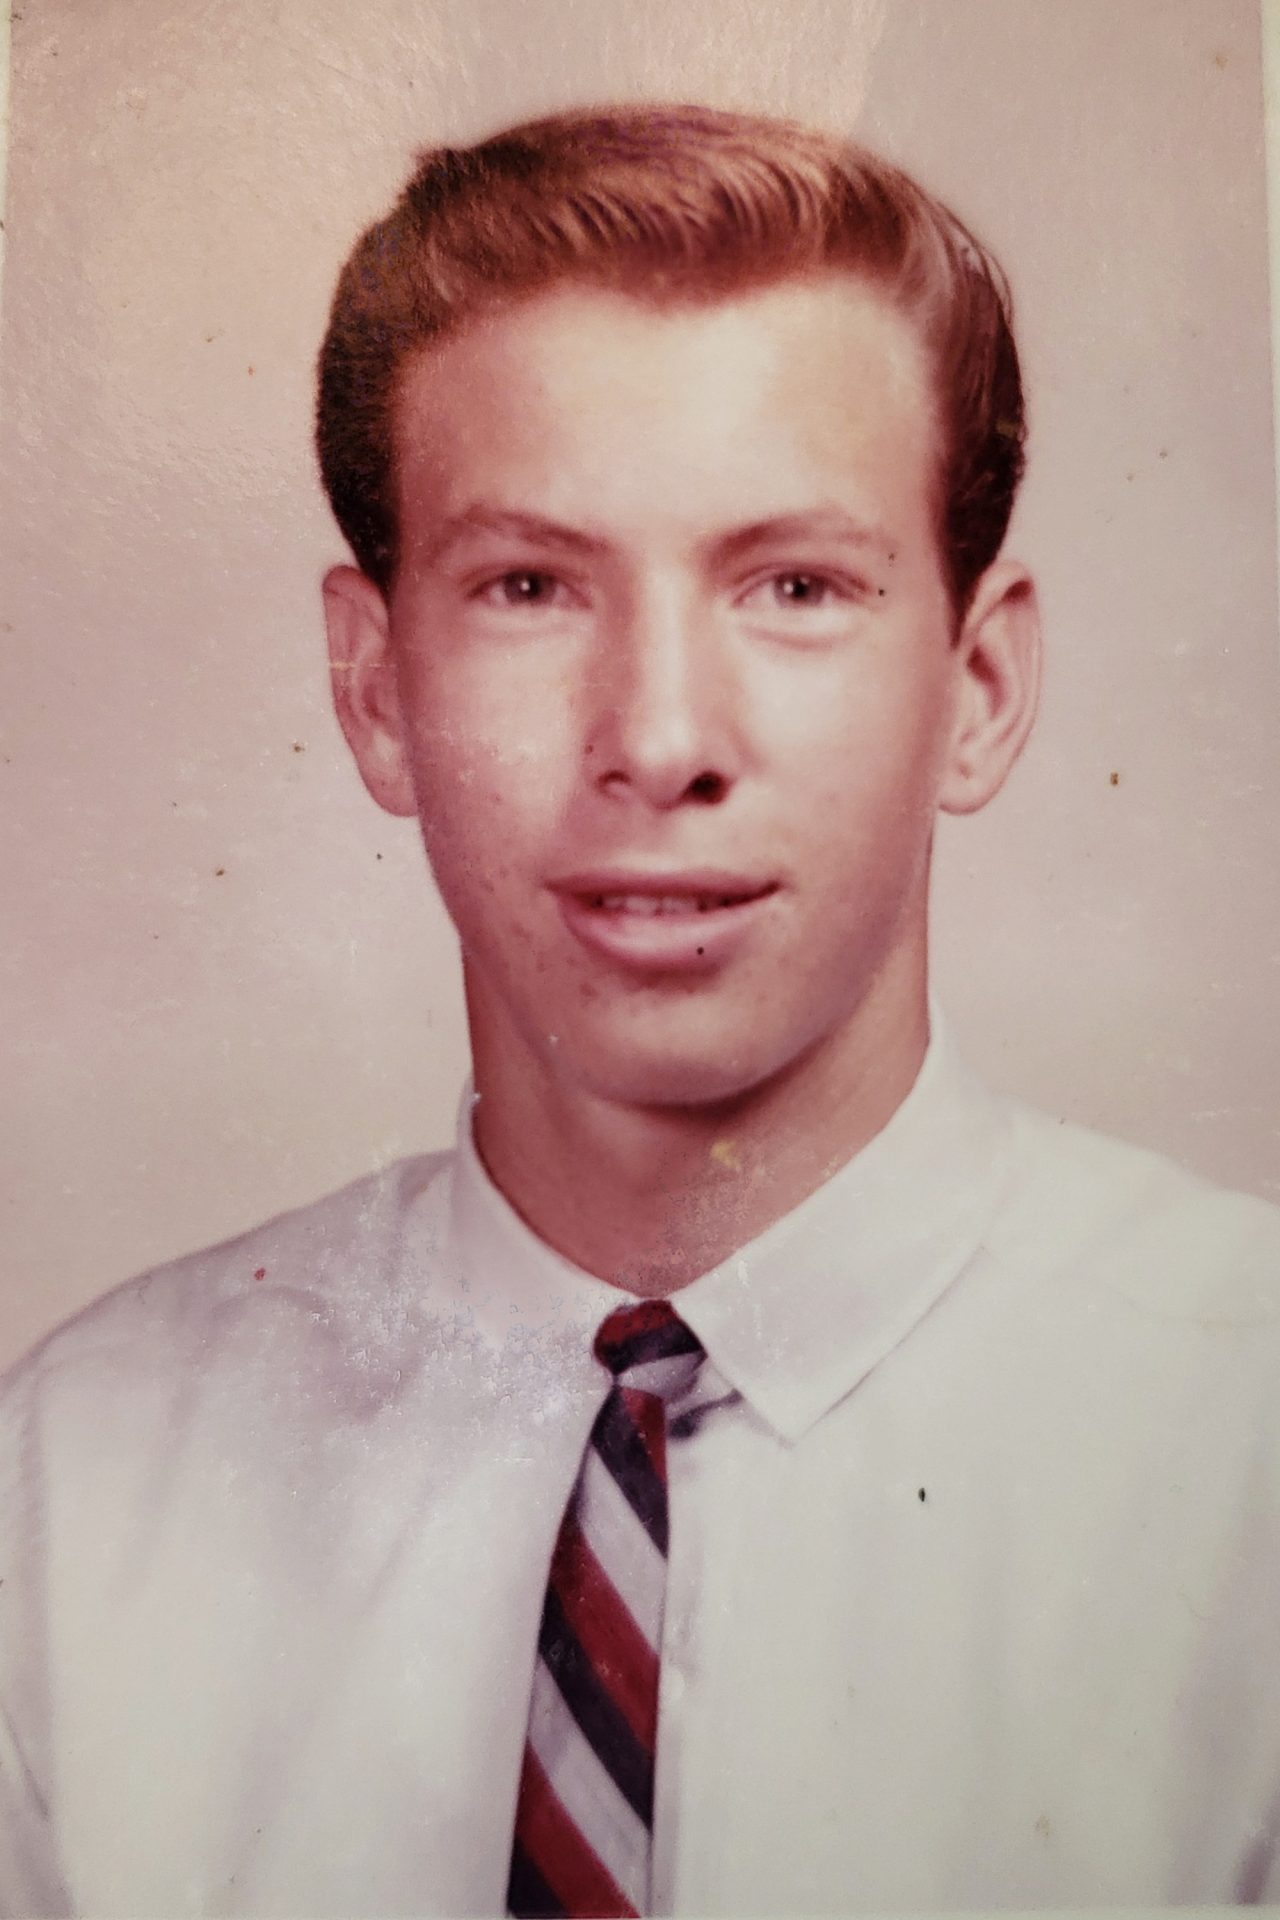 Ken as a late teenager.